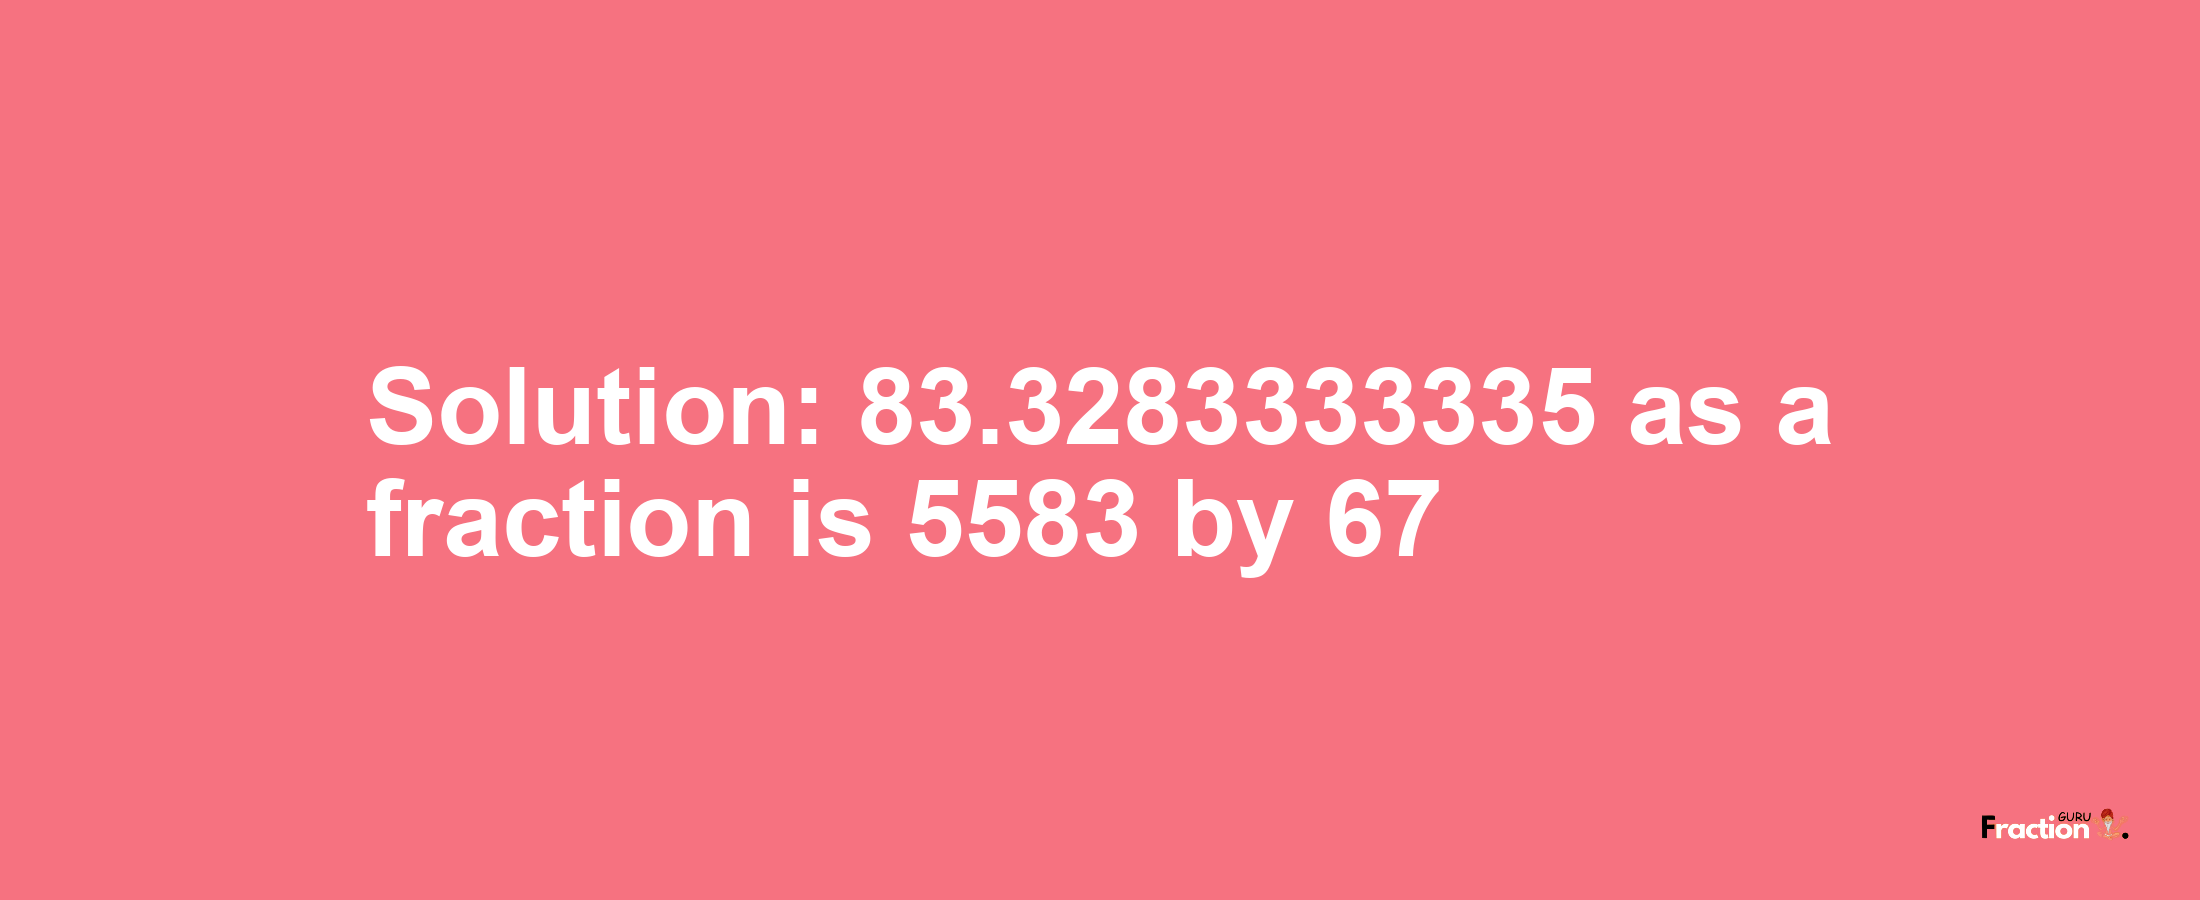 Solution:83.3283333335 as a fraction is 5583/67